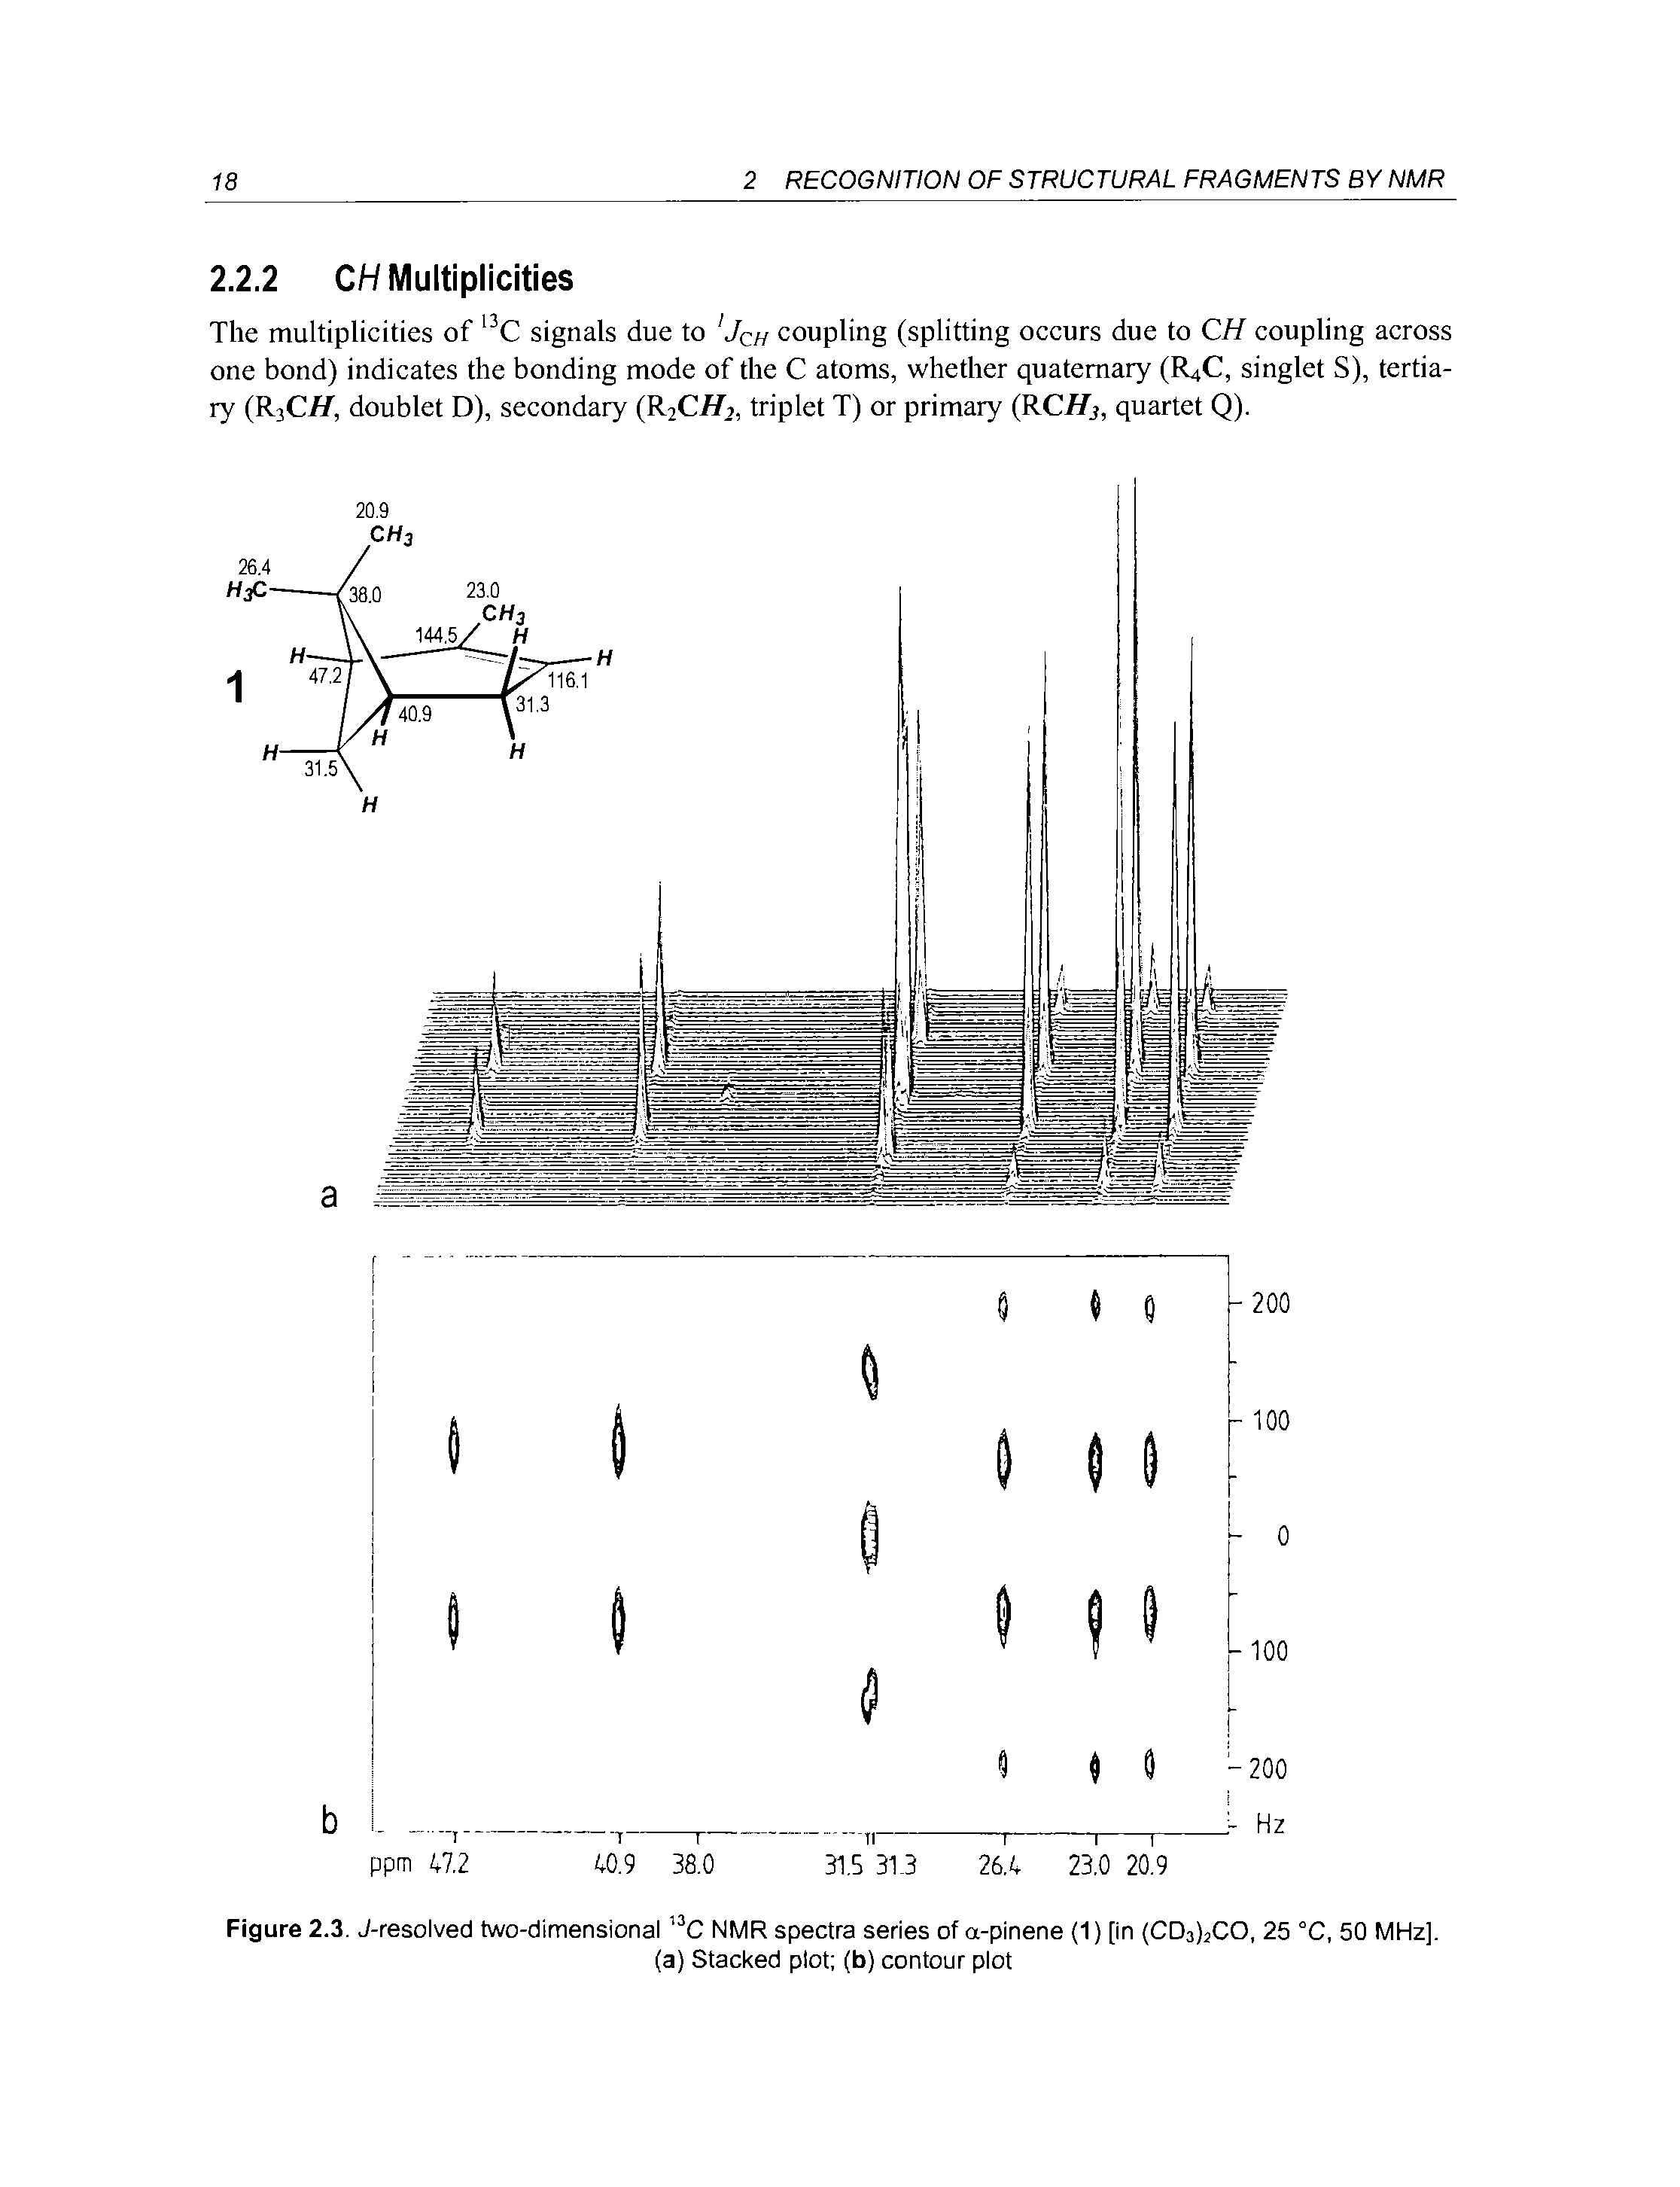 Figure 2.3. J-resolved two-dimensional C NMR spectra series of a-pinene (1) [in (CDsbCO, 25 °C, 50 MHz],...